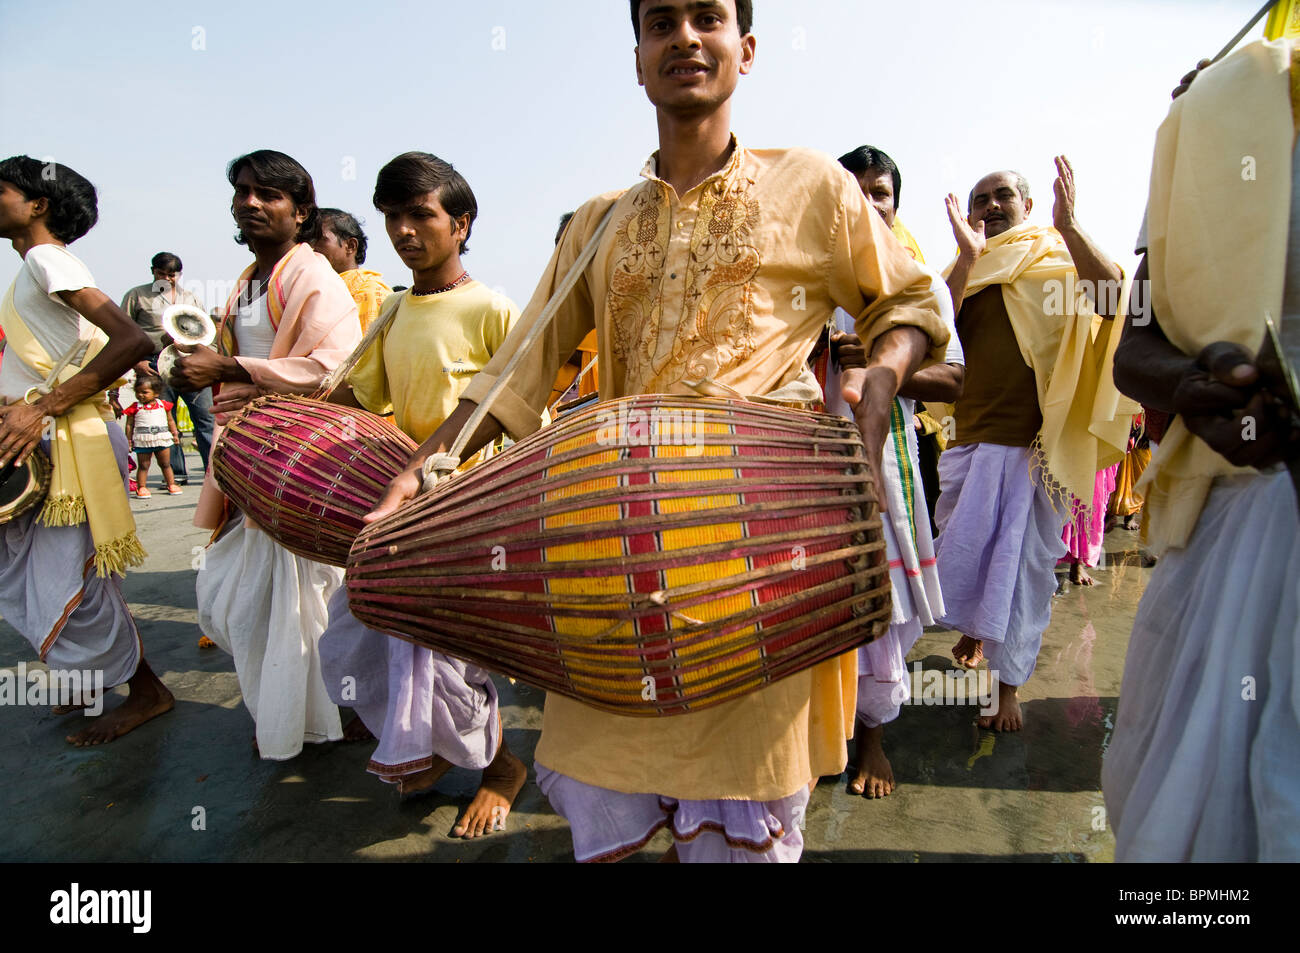 A colorful musical precession during a holy Hindu festival. Stock Photo